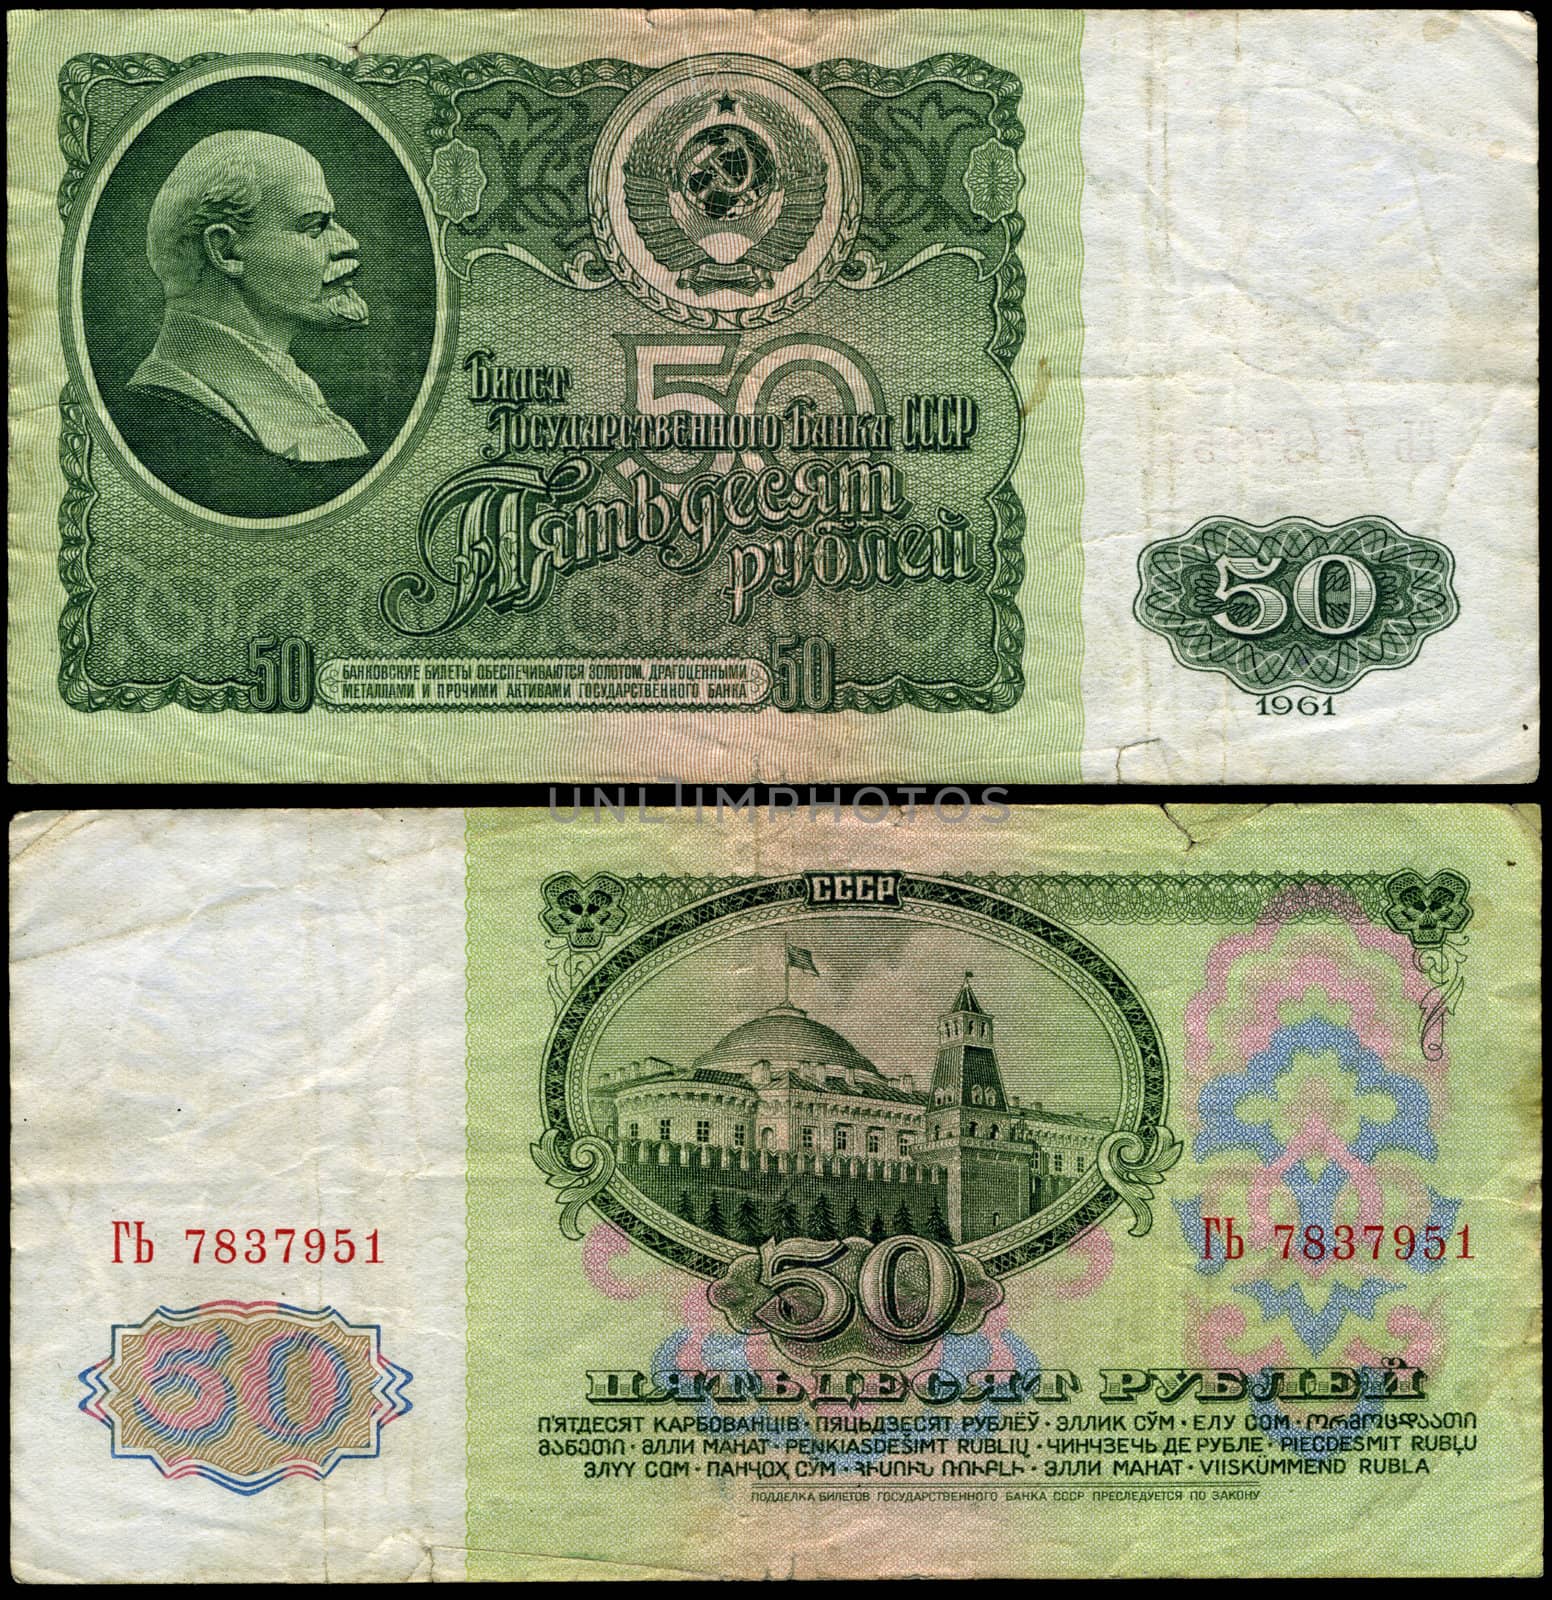 Front and back side of Soviet bank note worth 50 roubles, dating from 1961.
